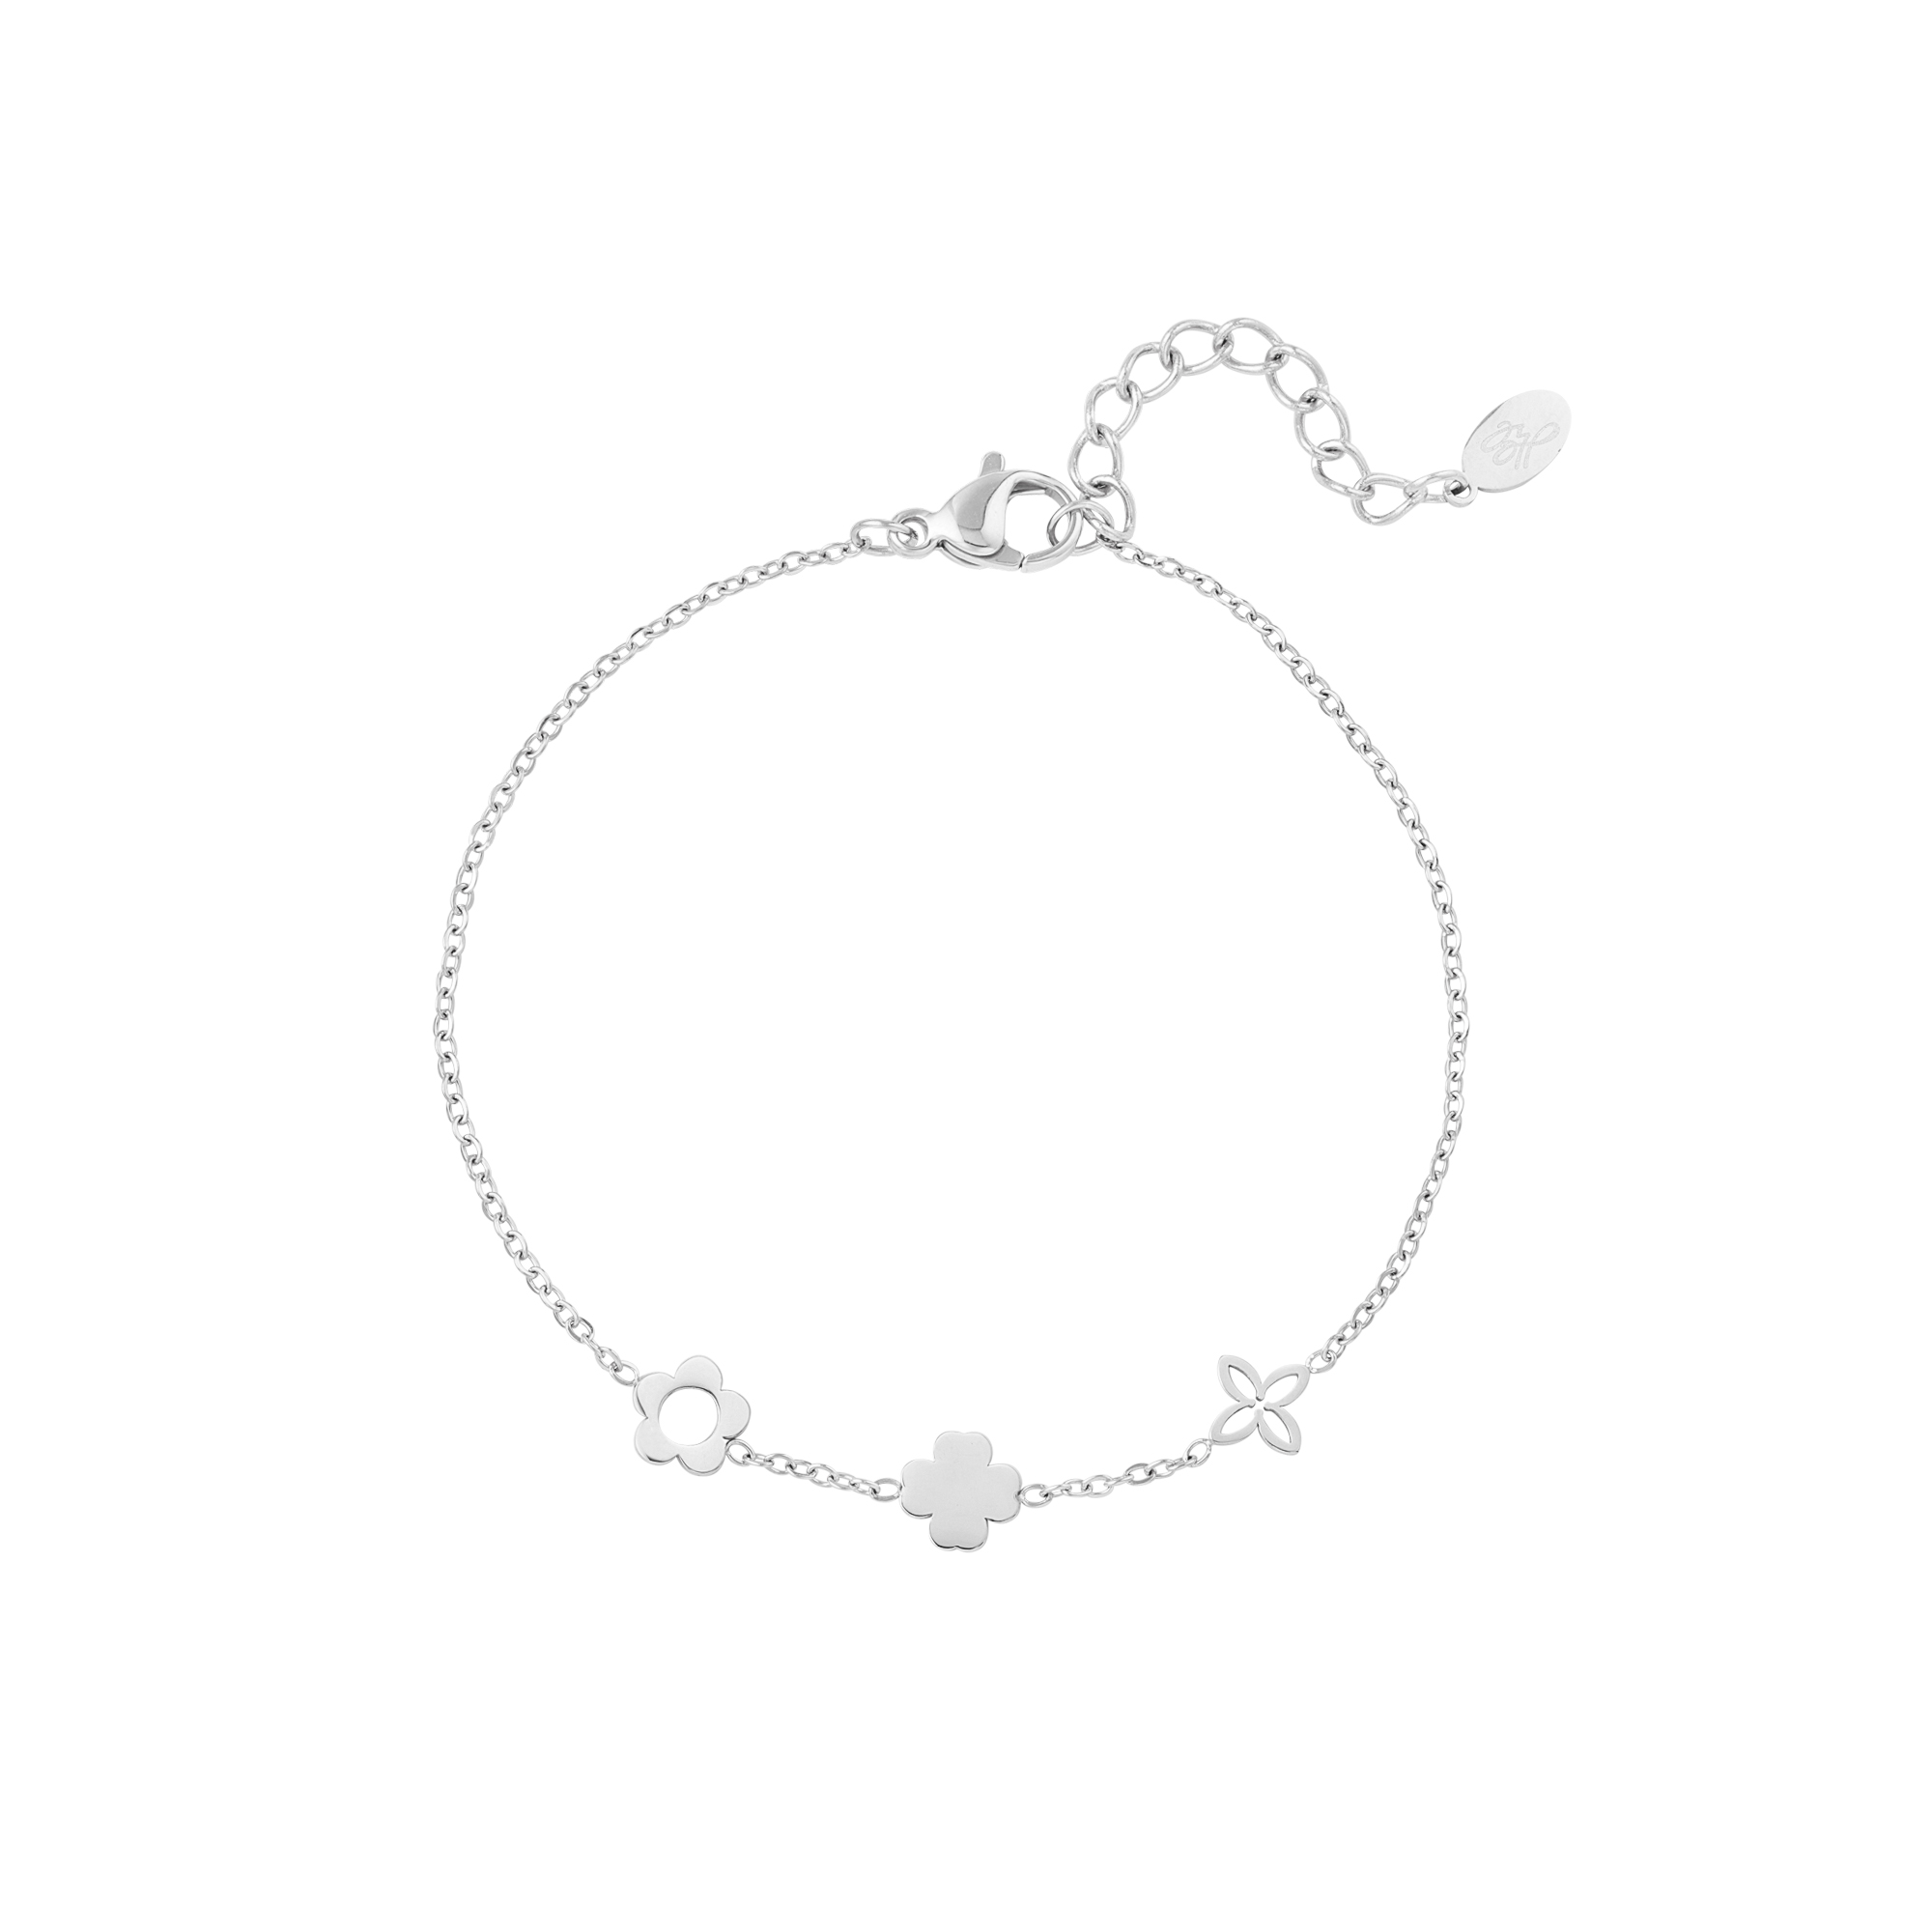 Bracelet with three different flowers